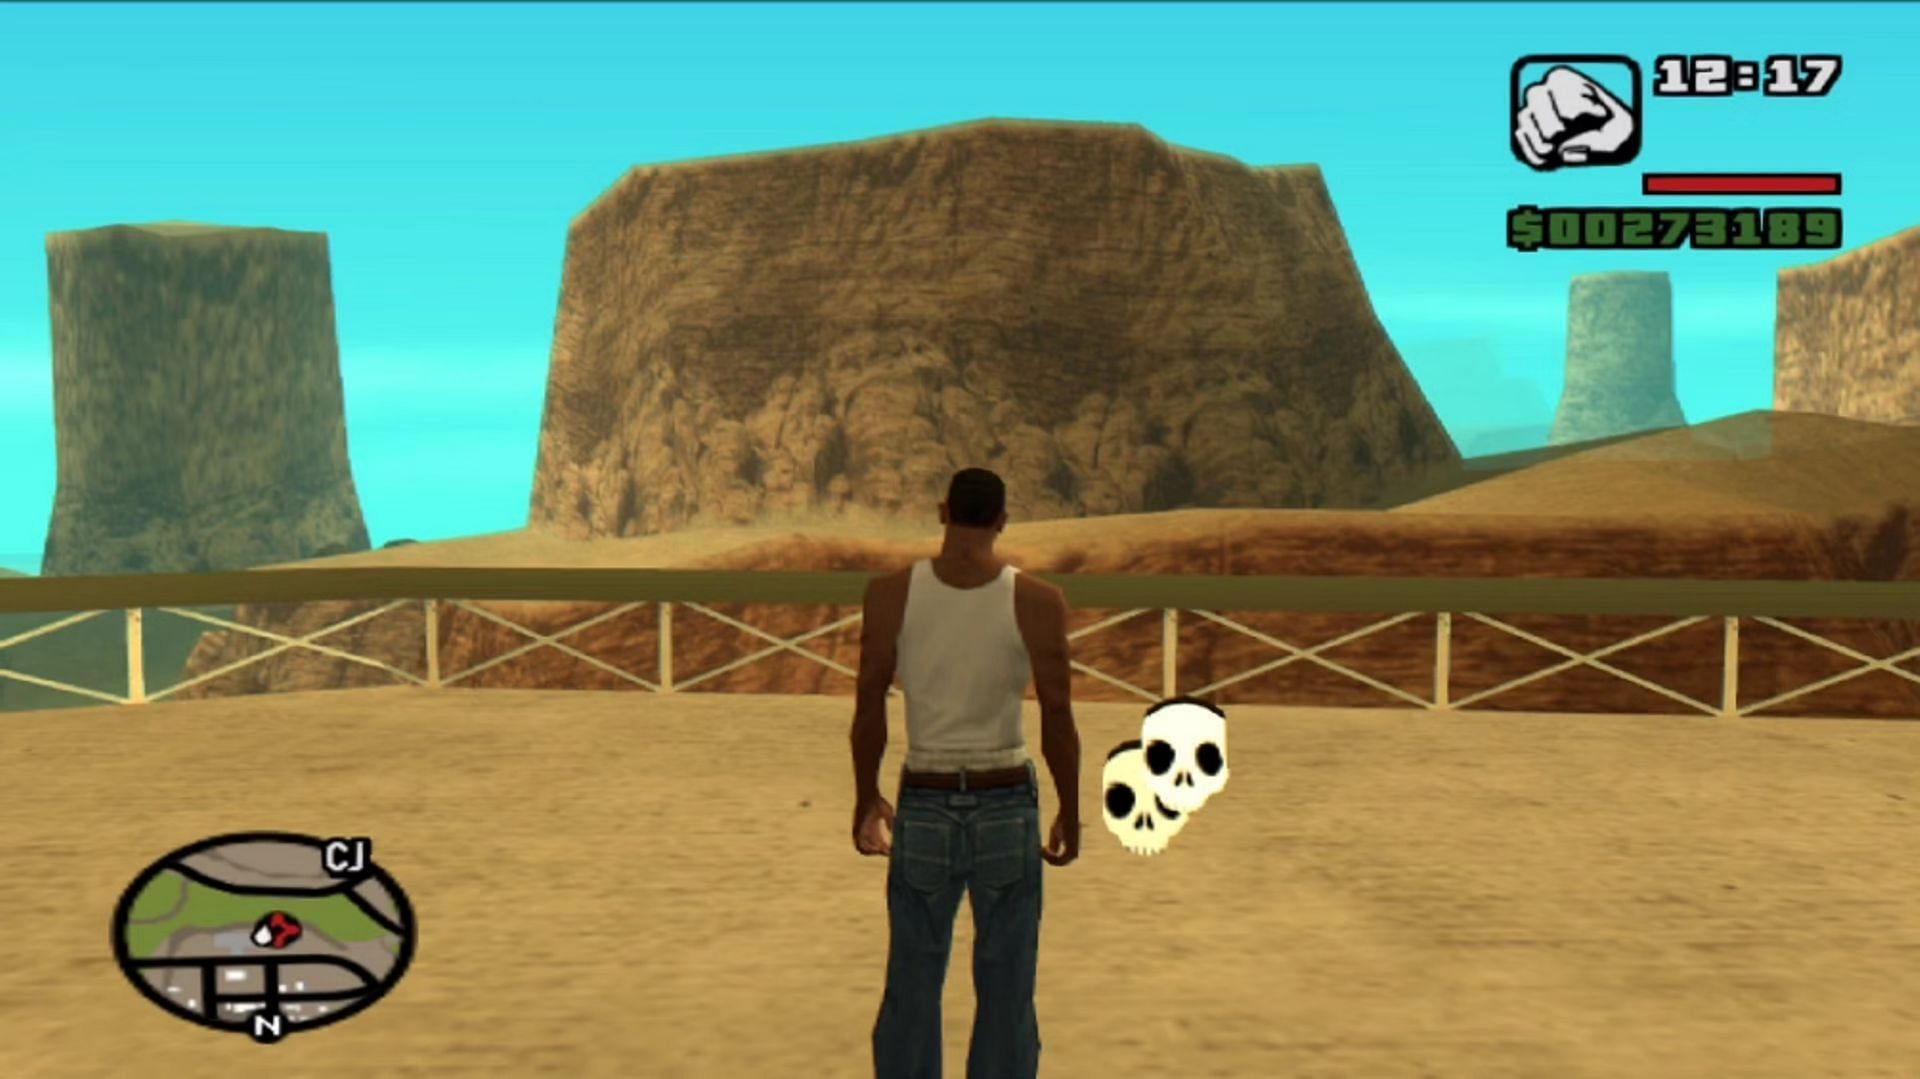 GTA San Andreas Definitive Edition Missing Co-Op Multiplayer